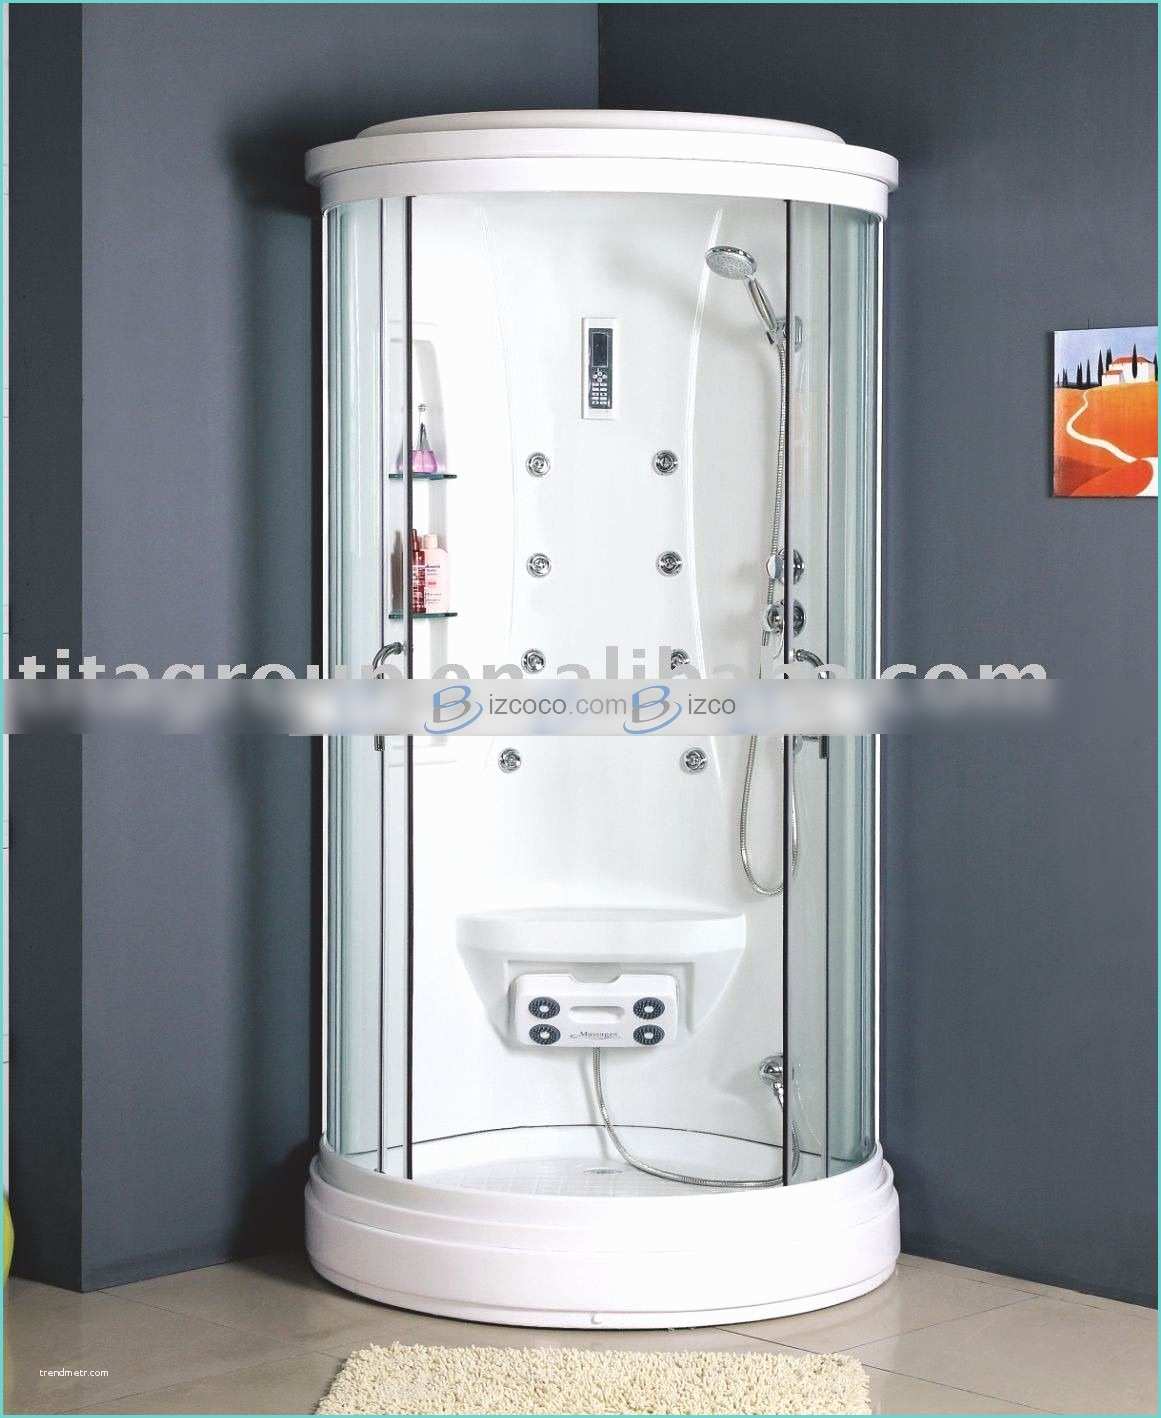 China Acrtlic Douche Steam Shower Carbin with Bathtub Suppliers Insignia Steam Showers for Sale Prices Manufacturers